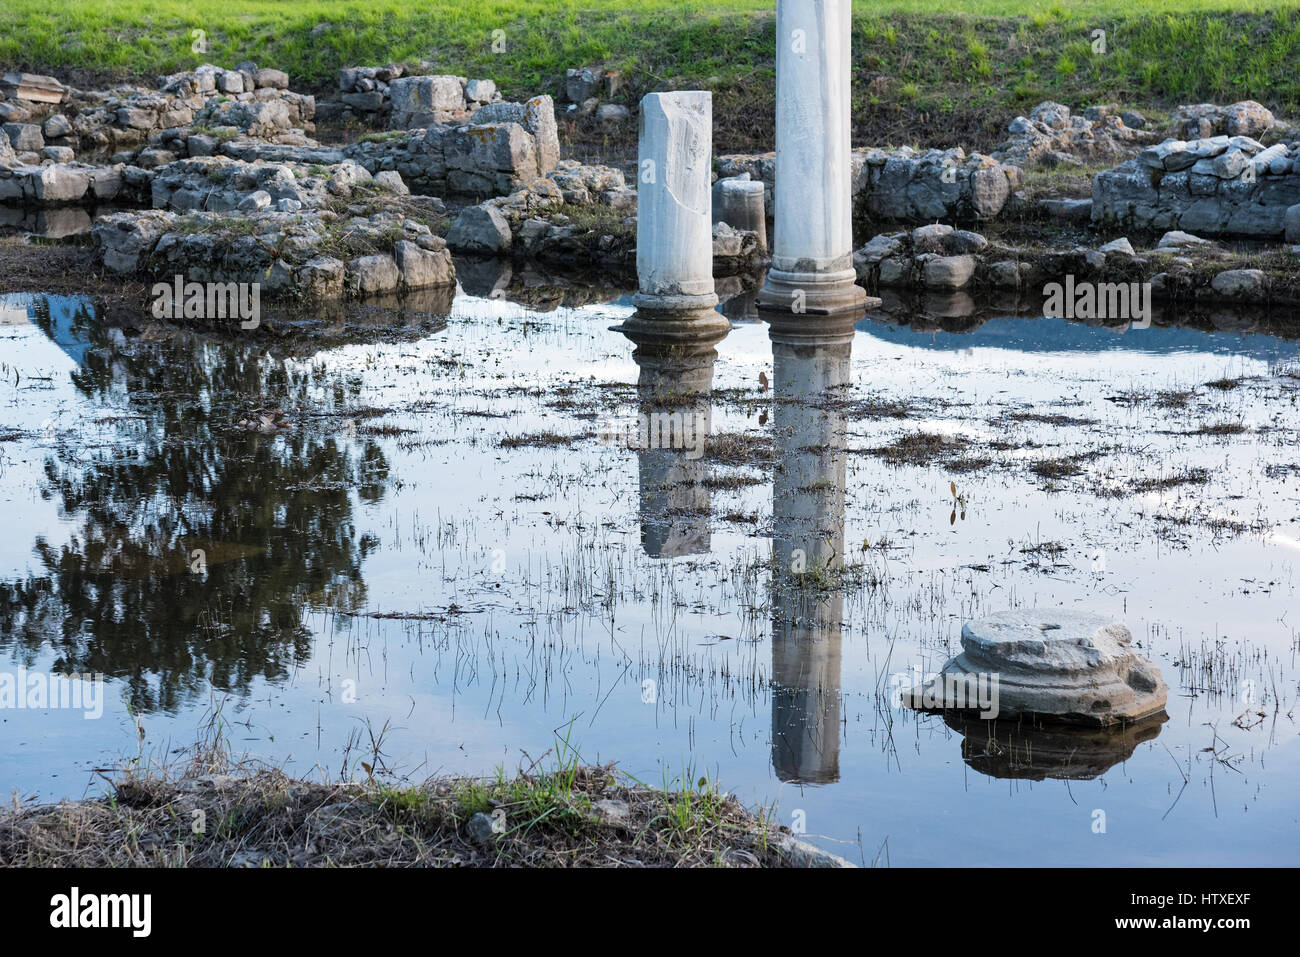 A small archaeological site in Kos island, Greece Stock Photo